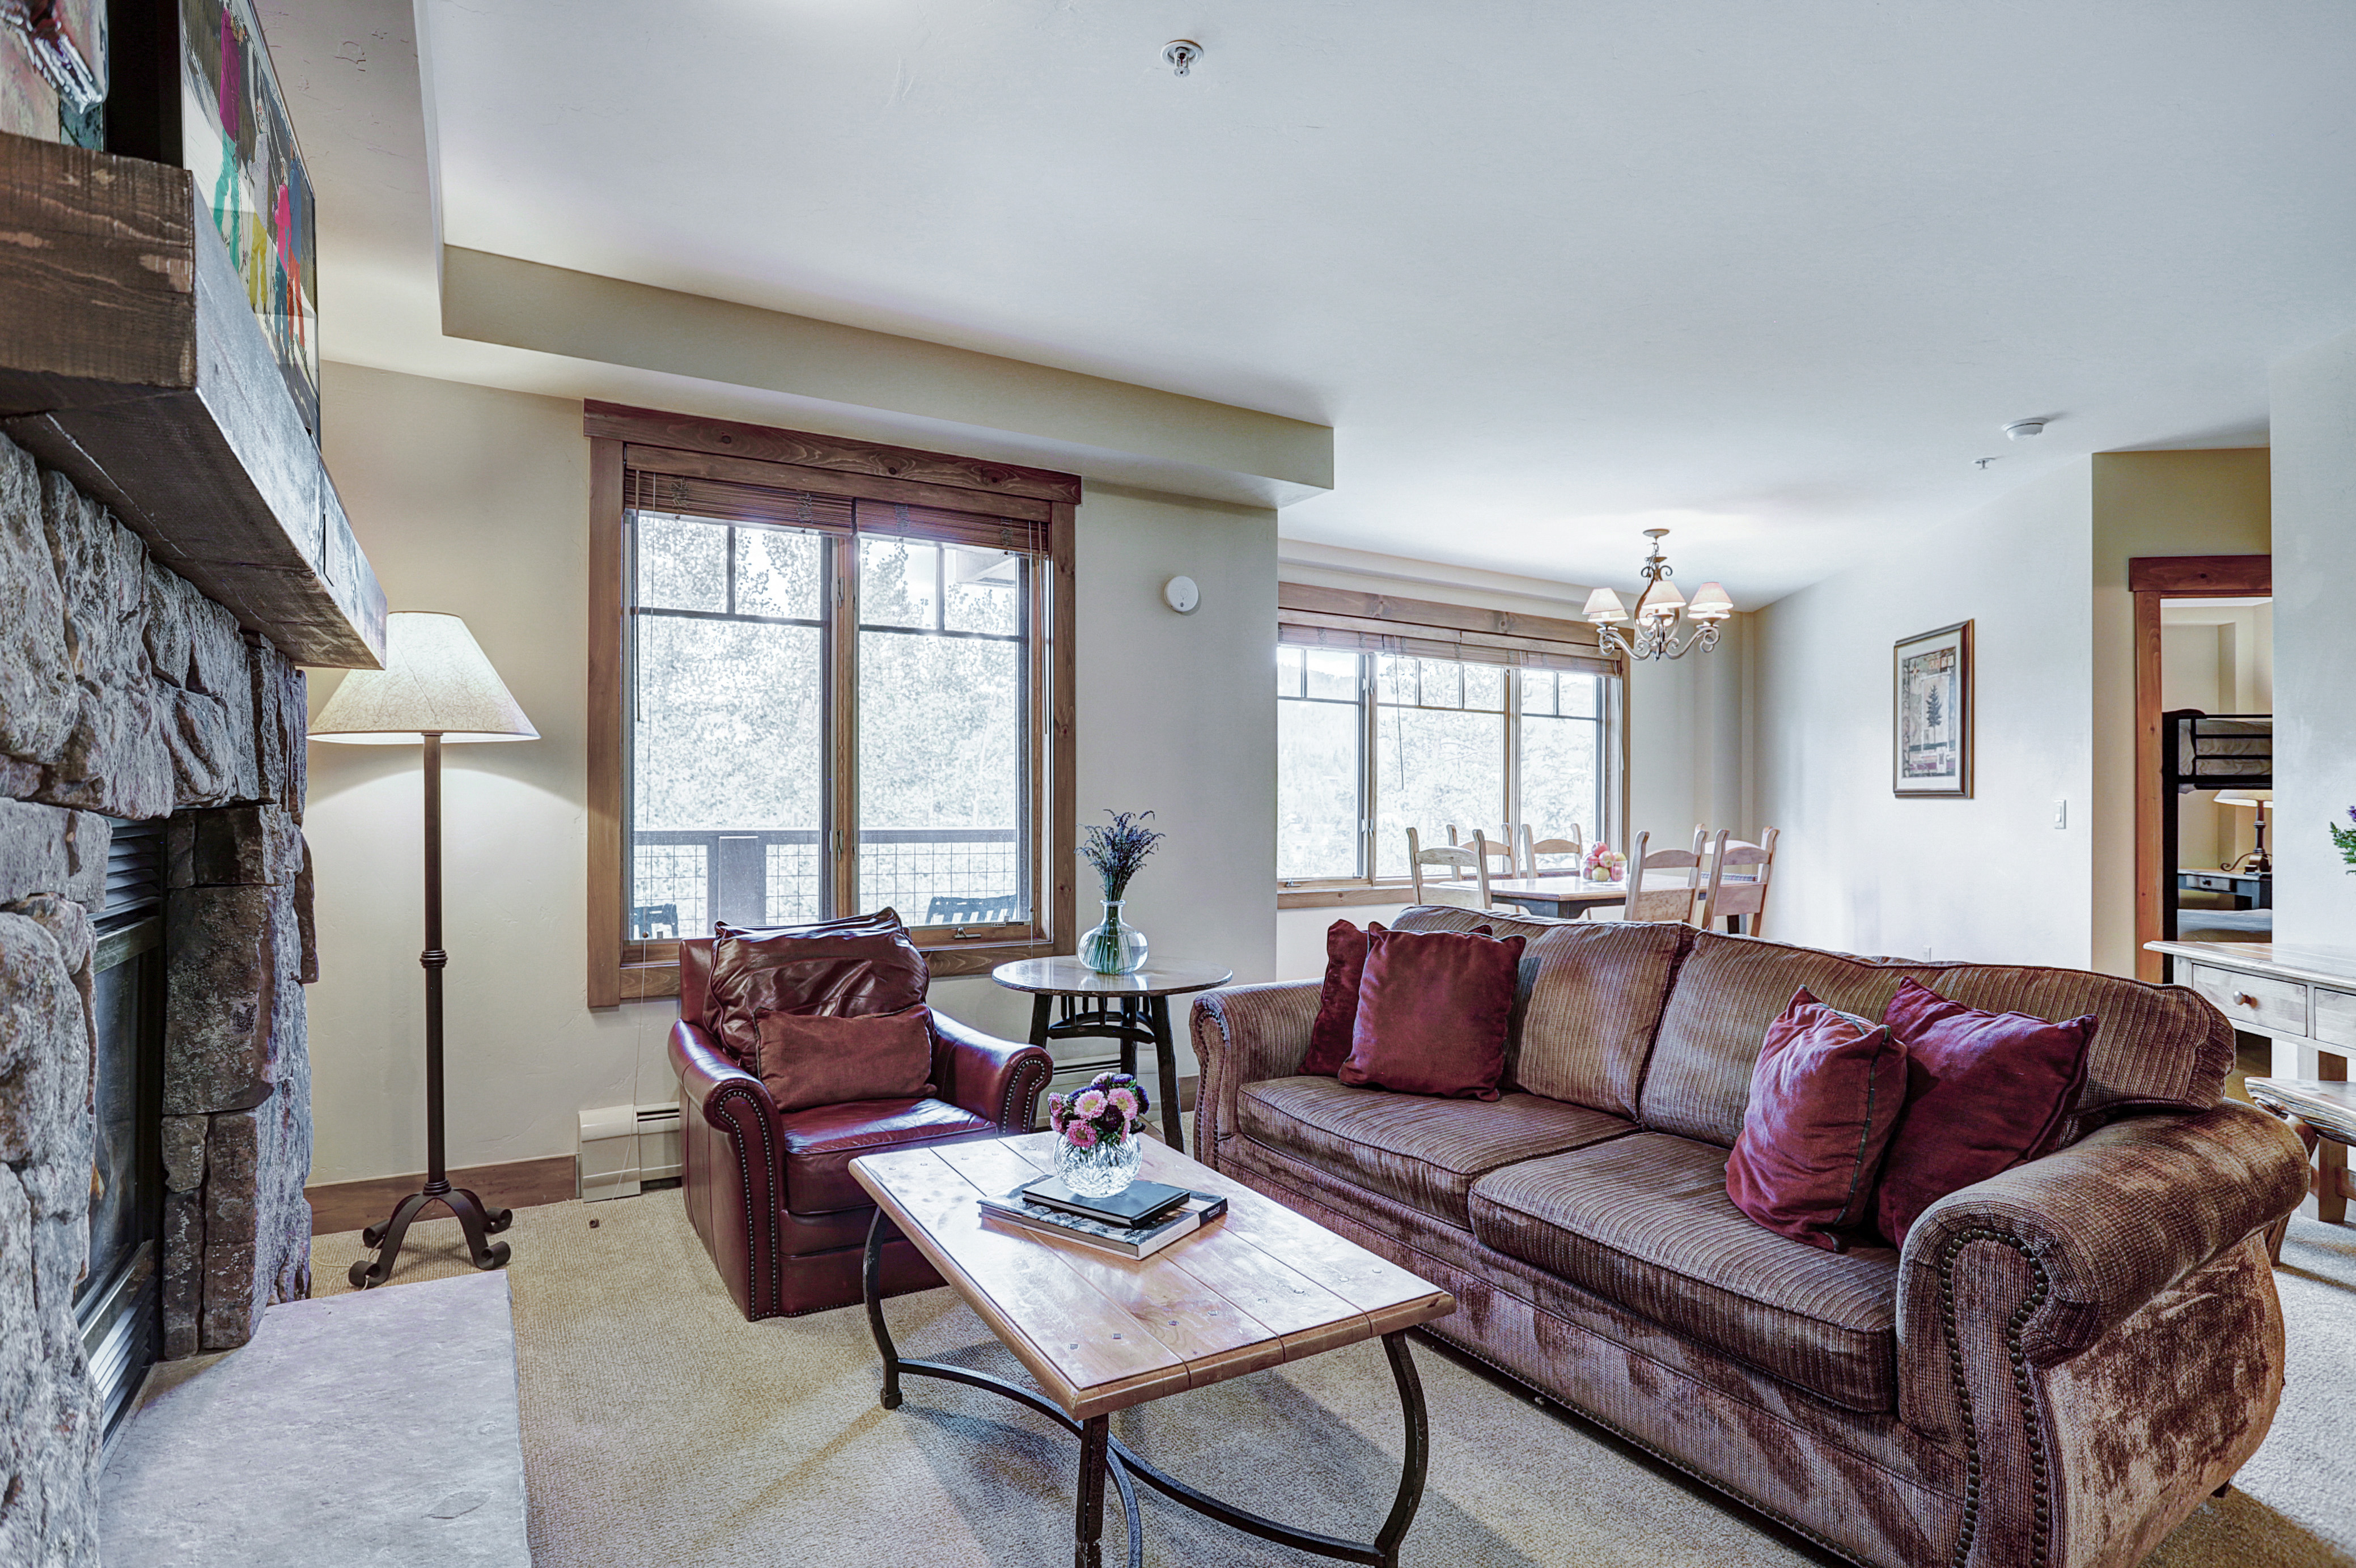 Relax with your group in front of the flat screen TV and gas fireplace